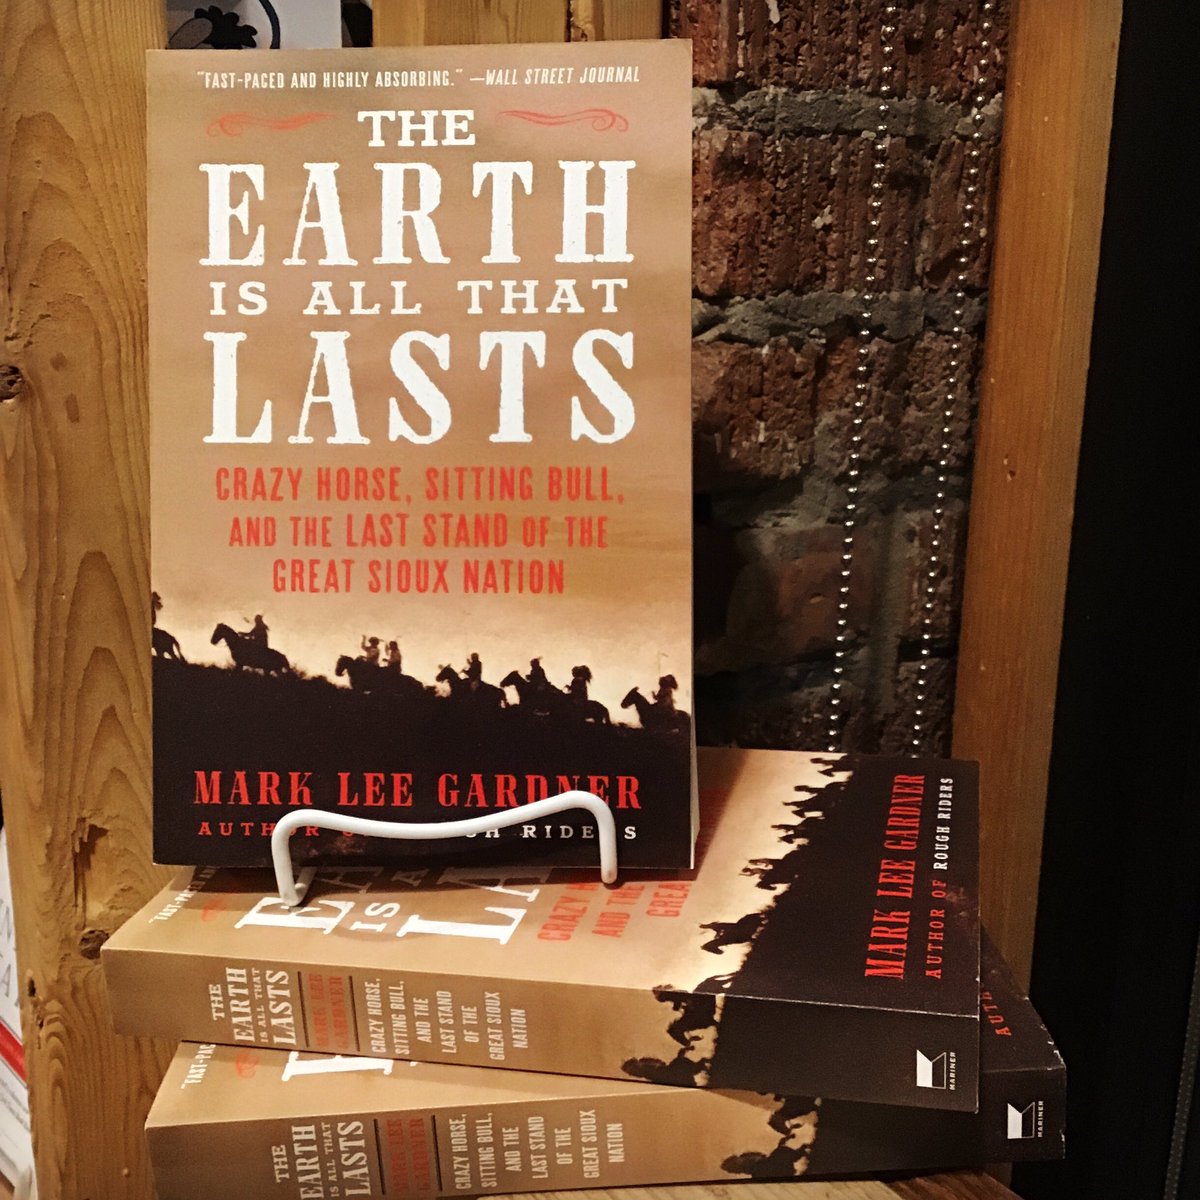 “The Earth Is All That Lasts is a grand saga, both triumphant and tragic, of Sitting Bull’s & Crazy Horse’s struggles to maintain the freedom of their people against impossible odds.” burningbooks.com/products/the-e…